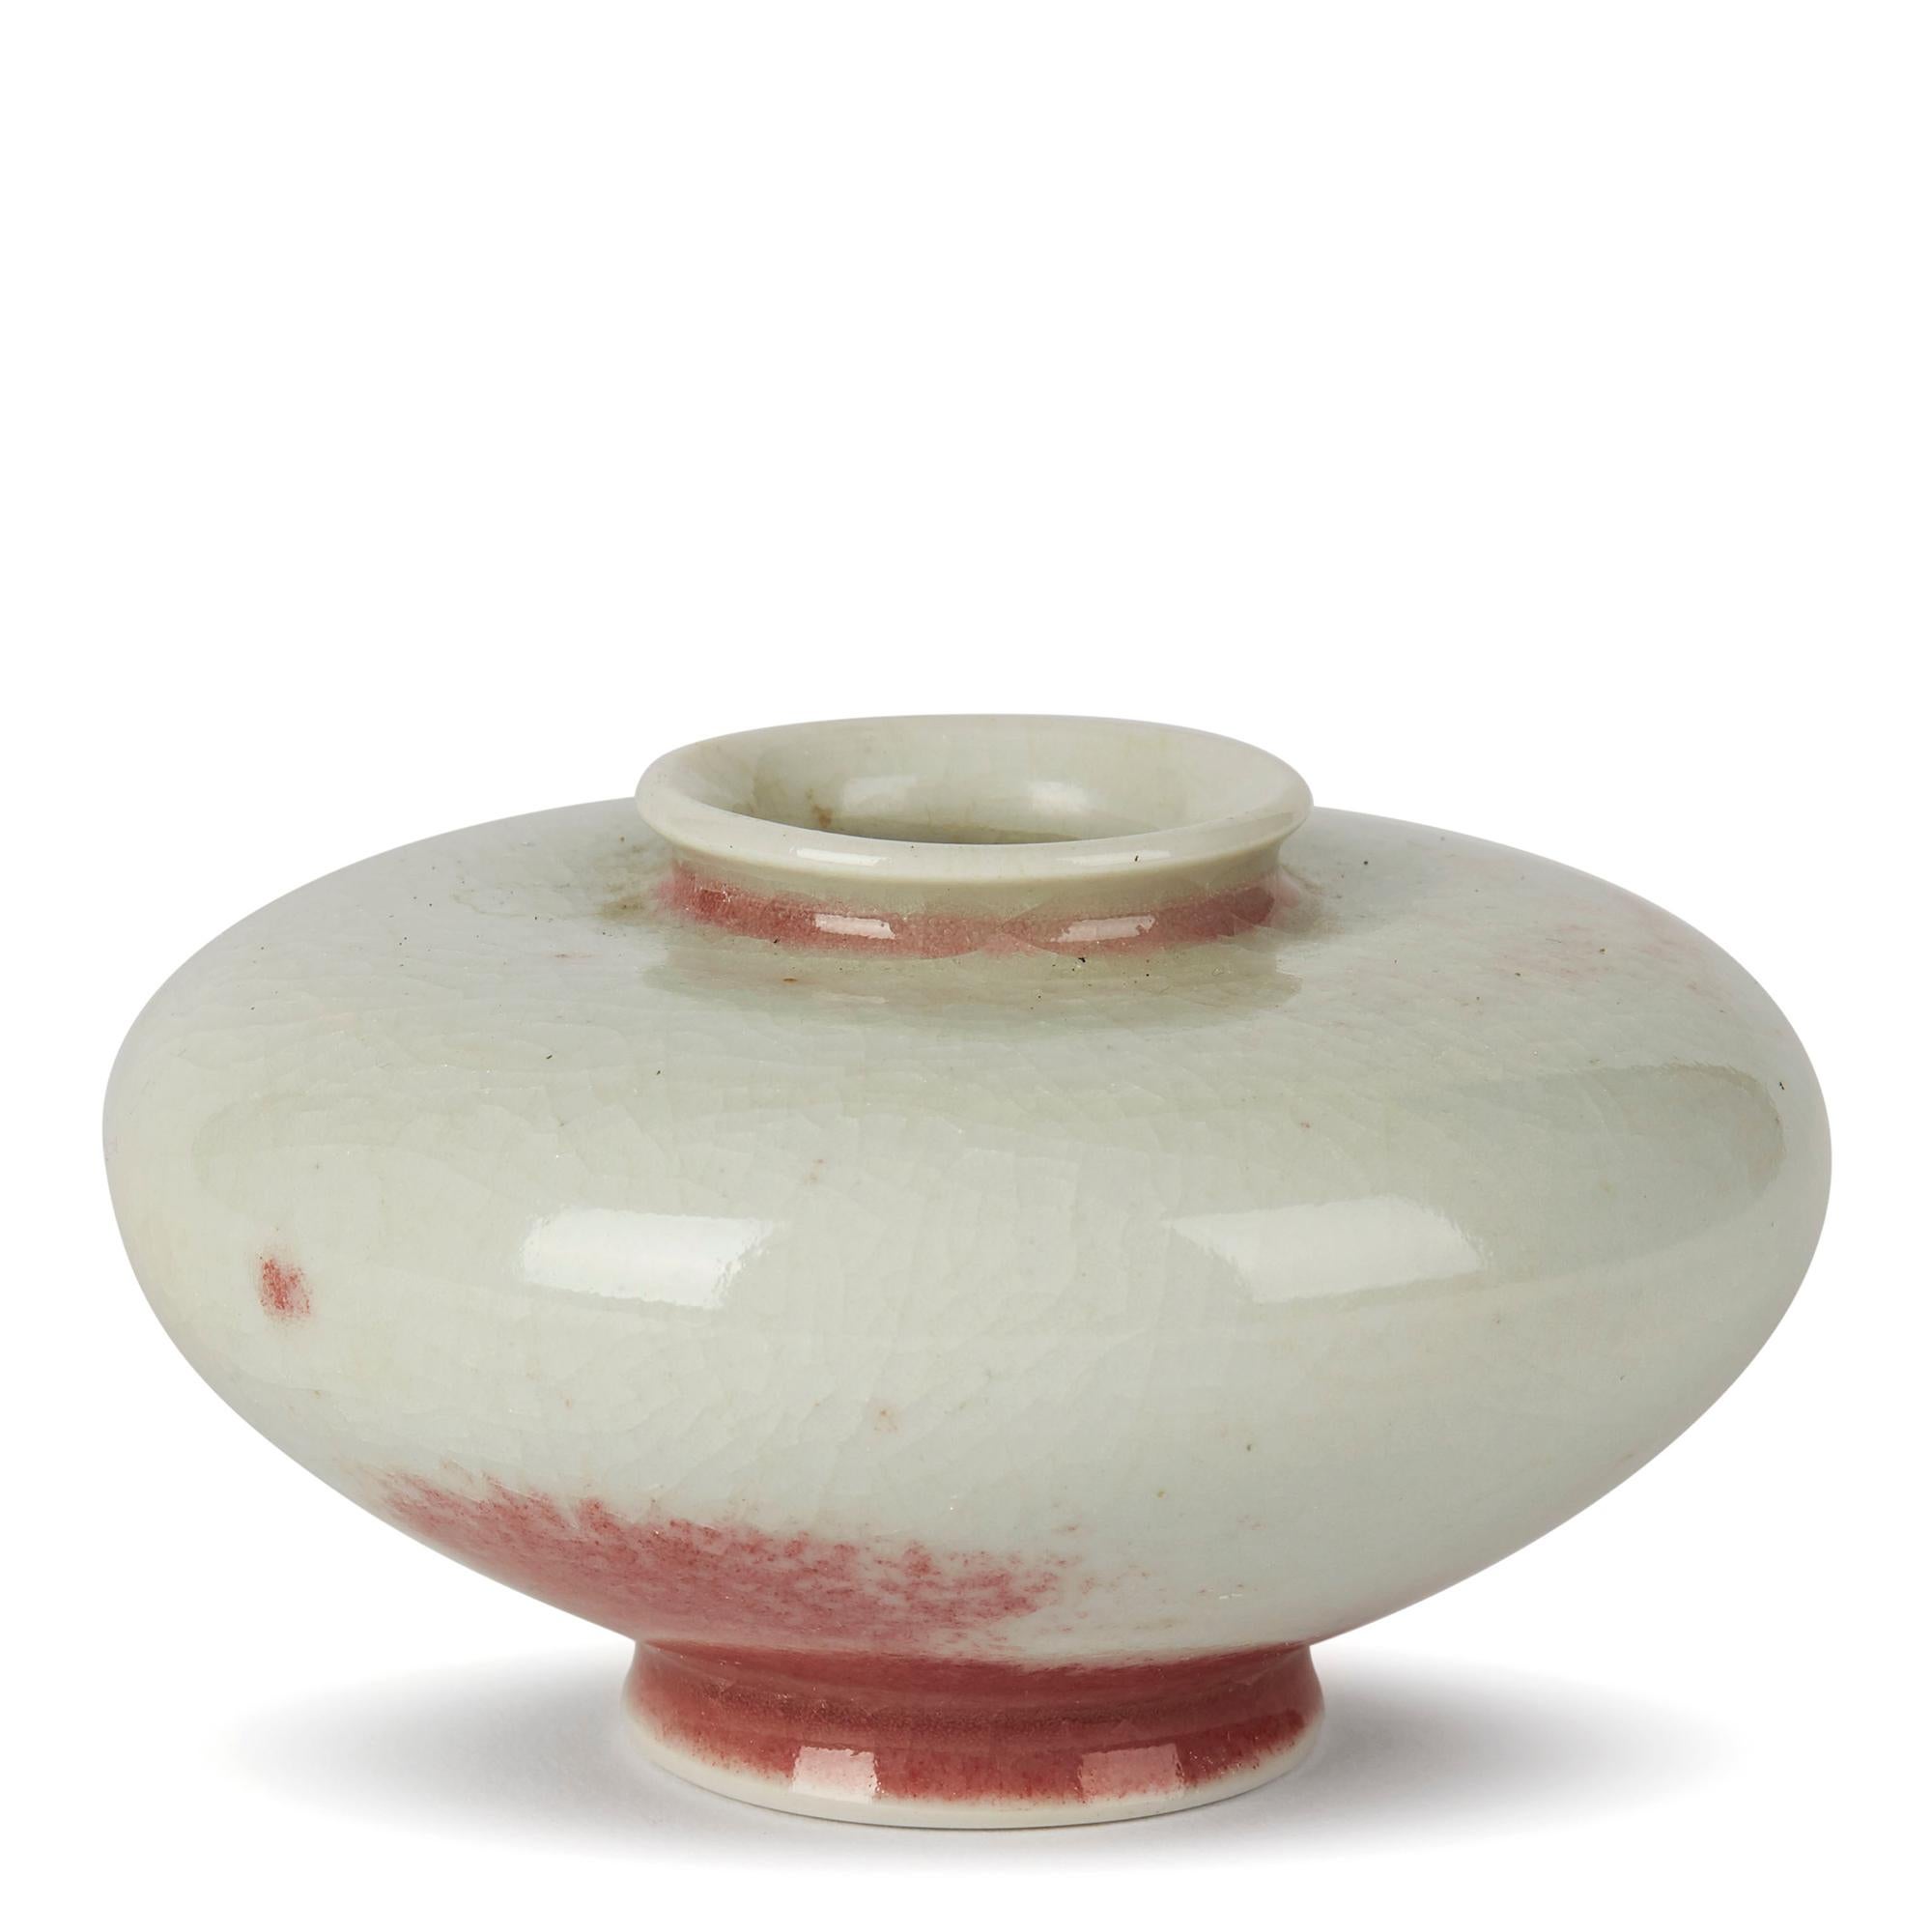 British William Mehornay Studio Pottery Porcelain Red and White Vase, 1980-1985 For Sale